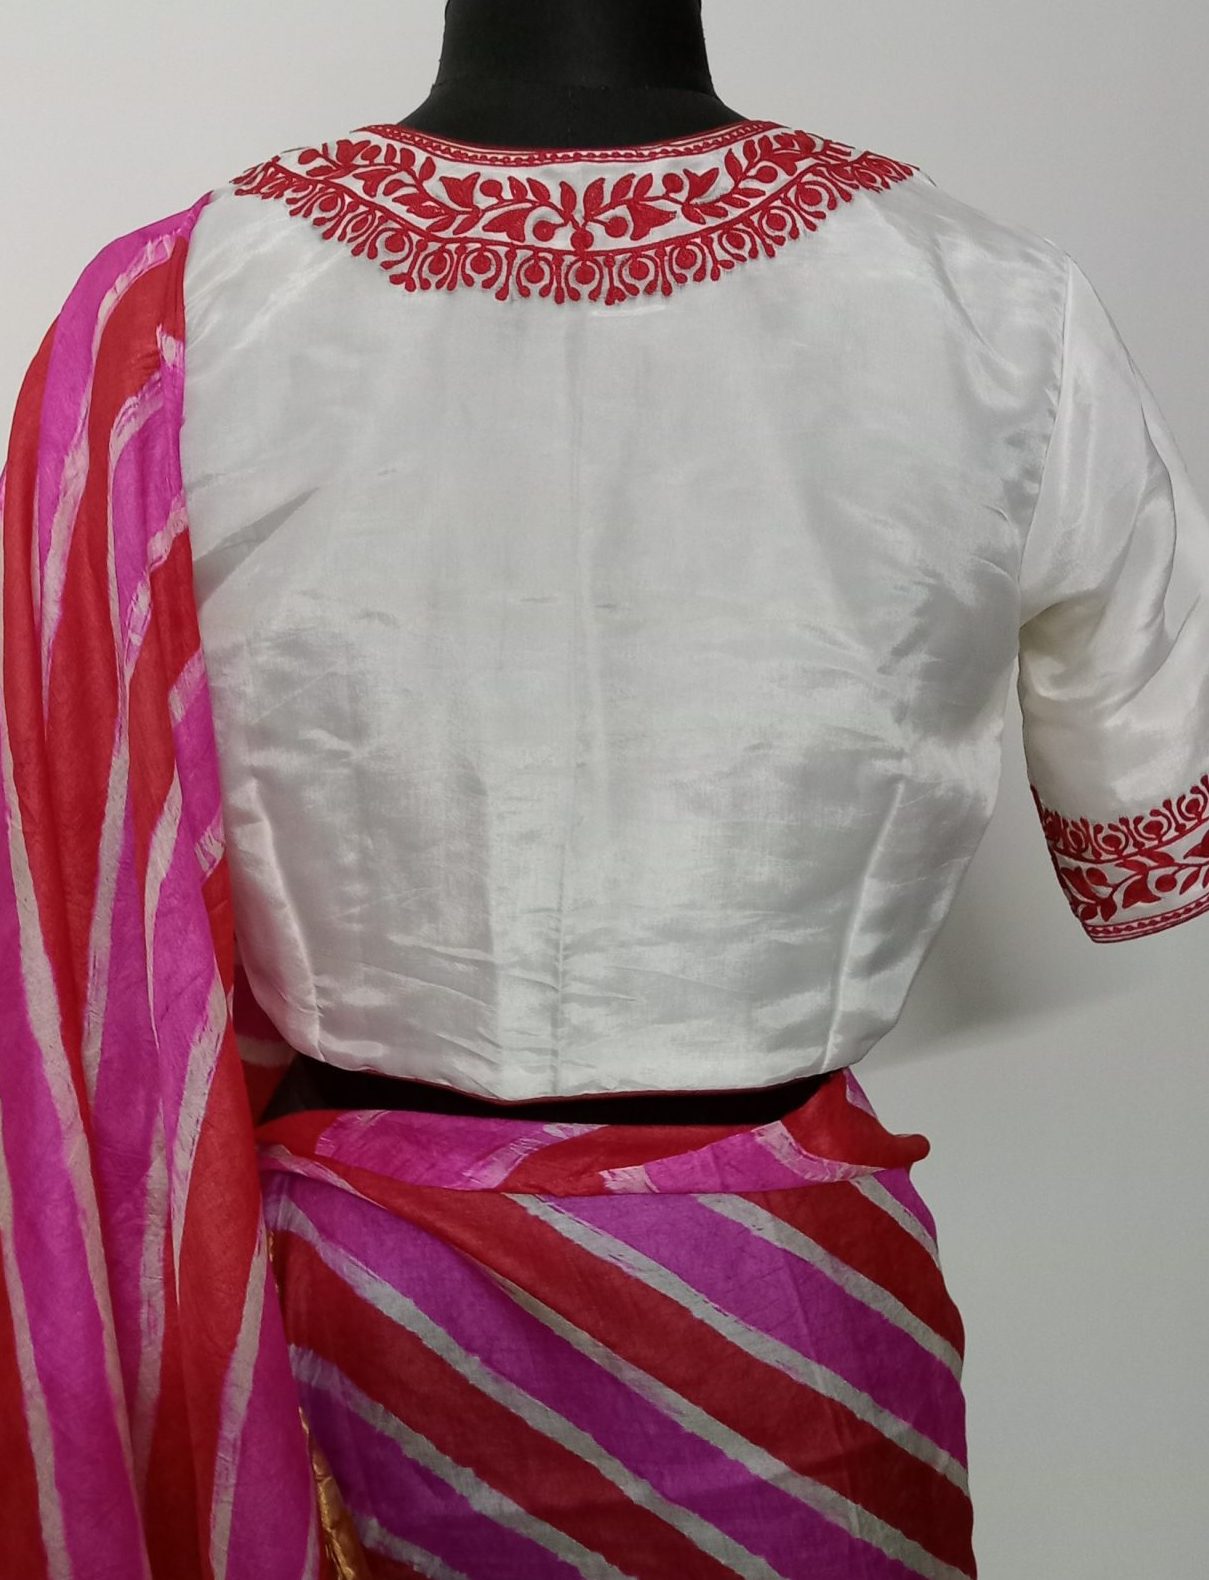 white blouse with red embroidery